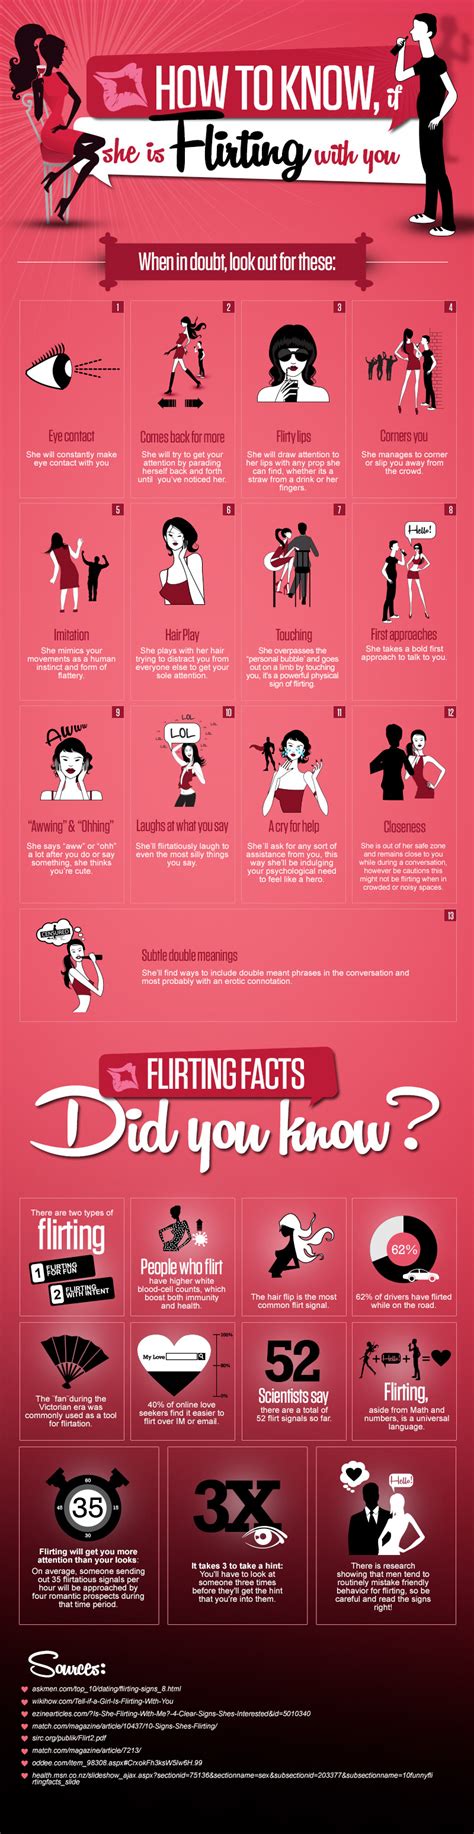 How To Know She Is Flirting With You Infographic